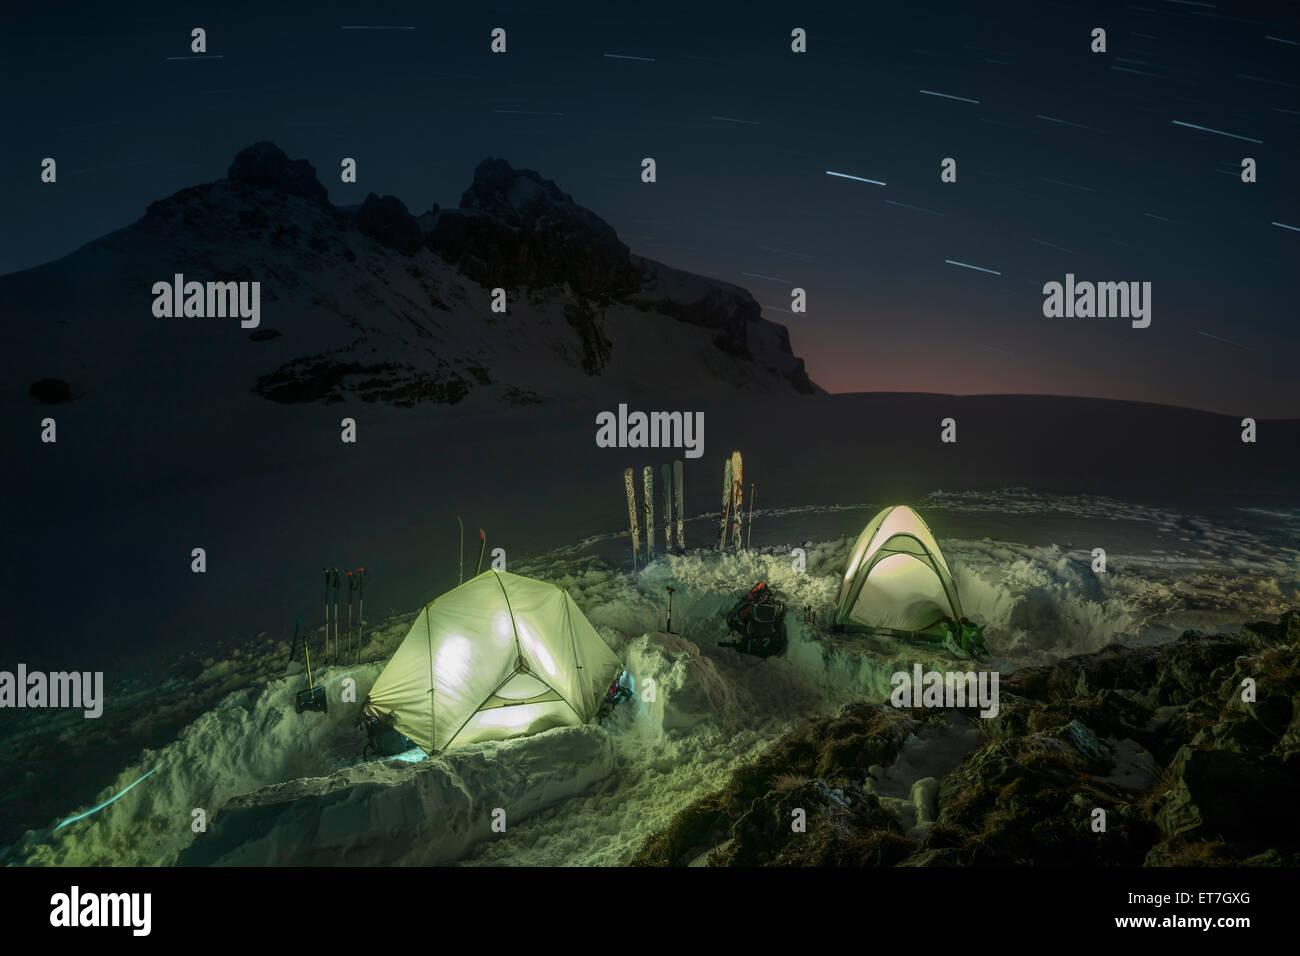 Tents lit up at night in the snow, Tyrol, Austria Stock Photo